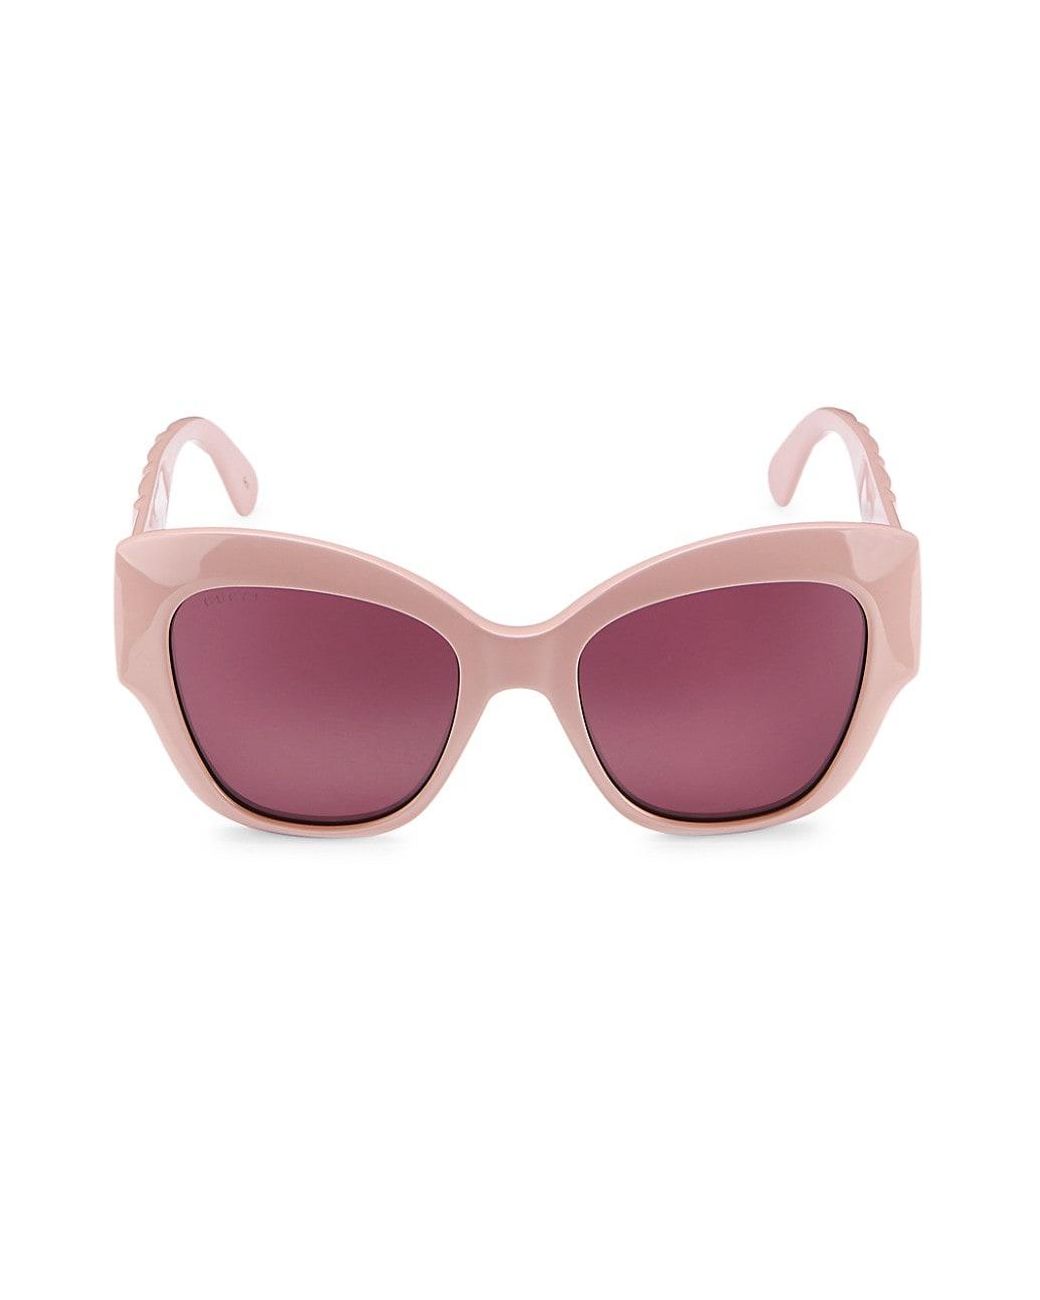 Gucci Leather 53mm Cat Eye Sunglasses in Pink - Lyst